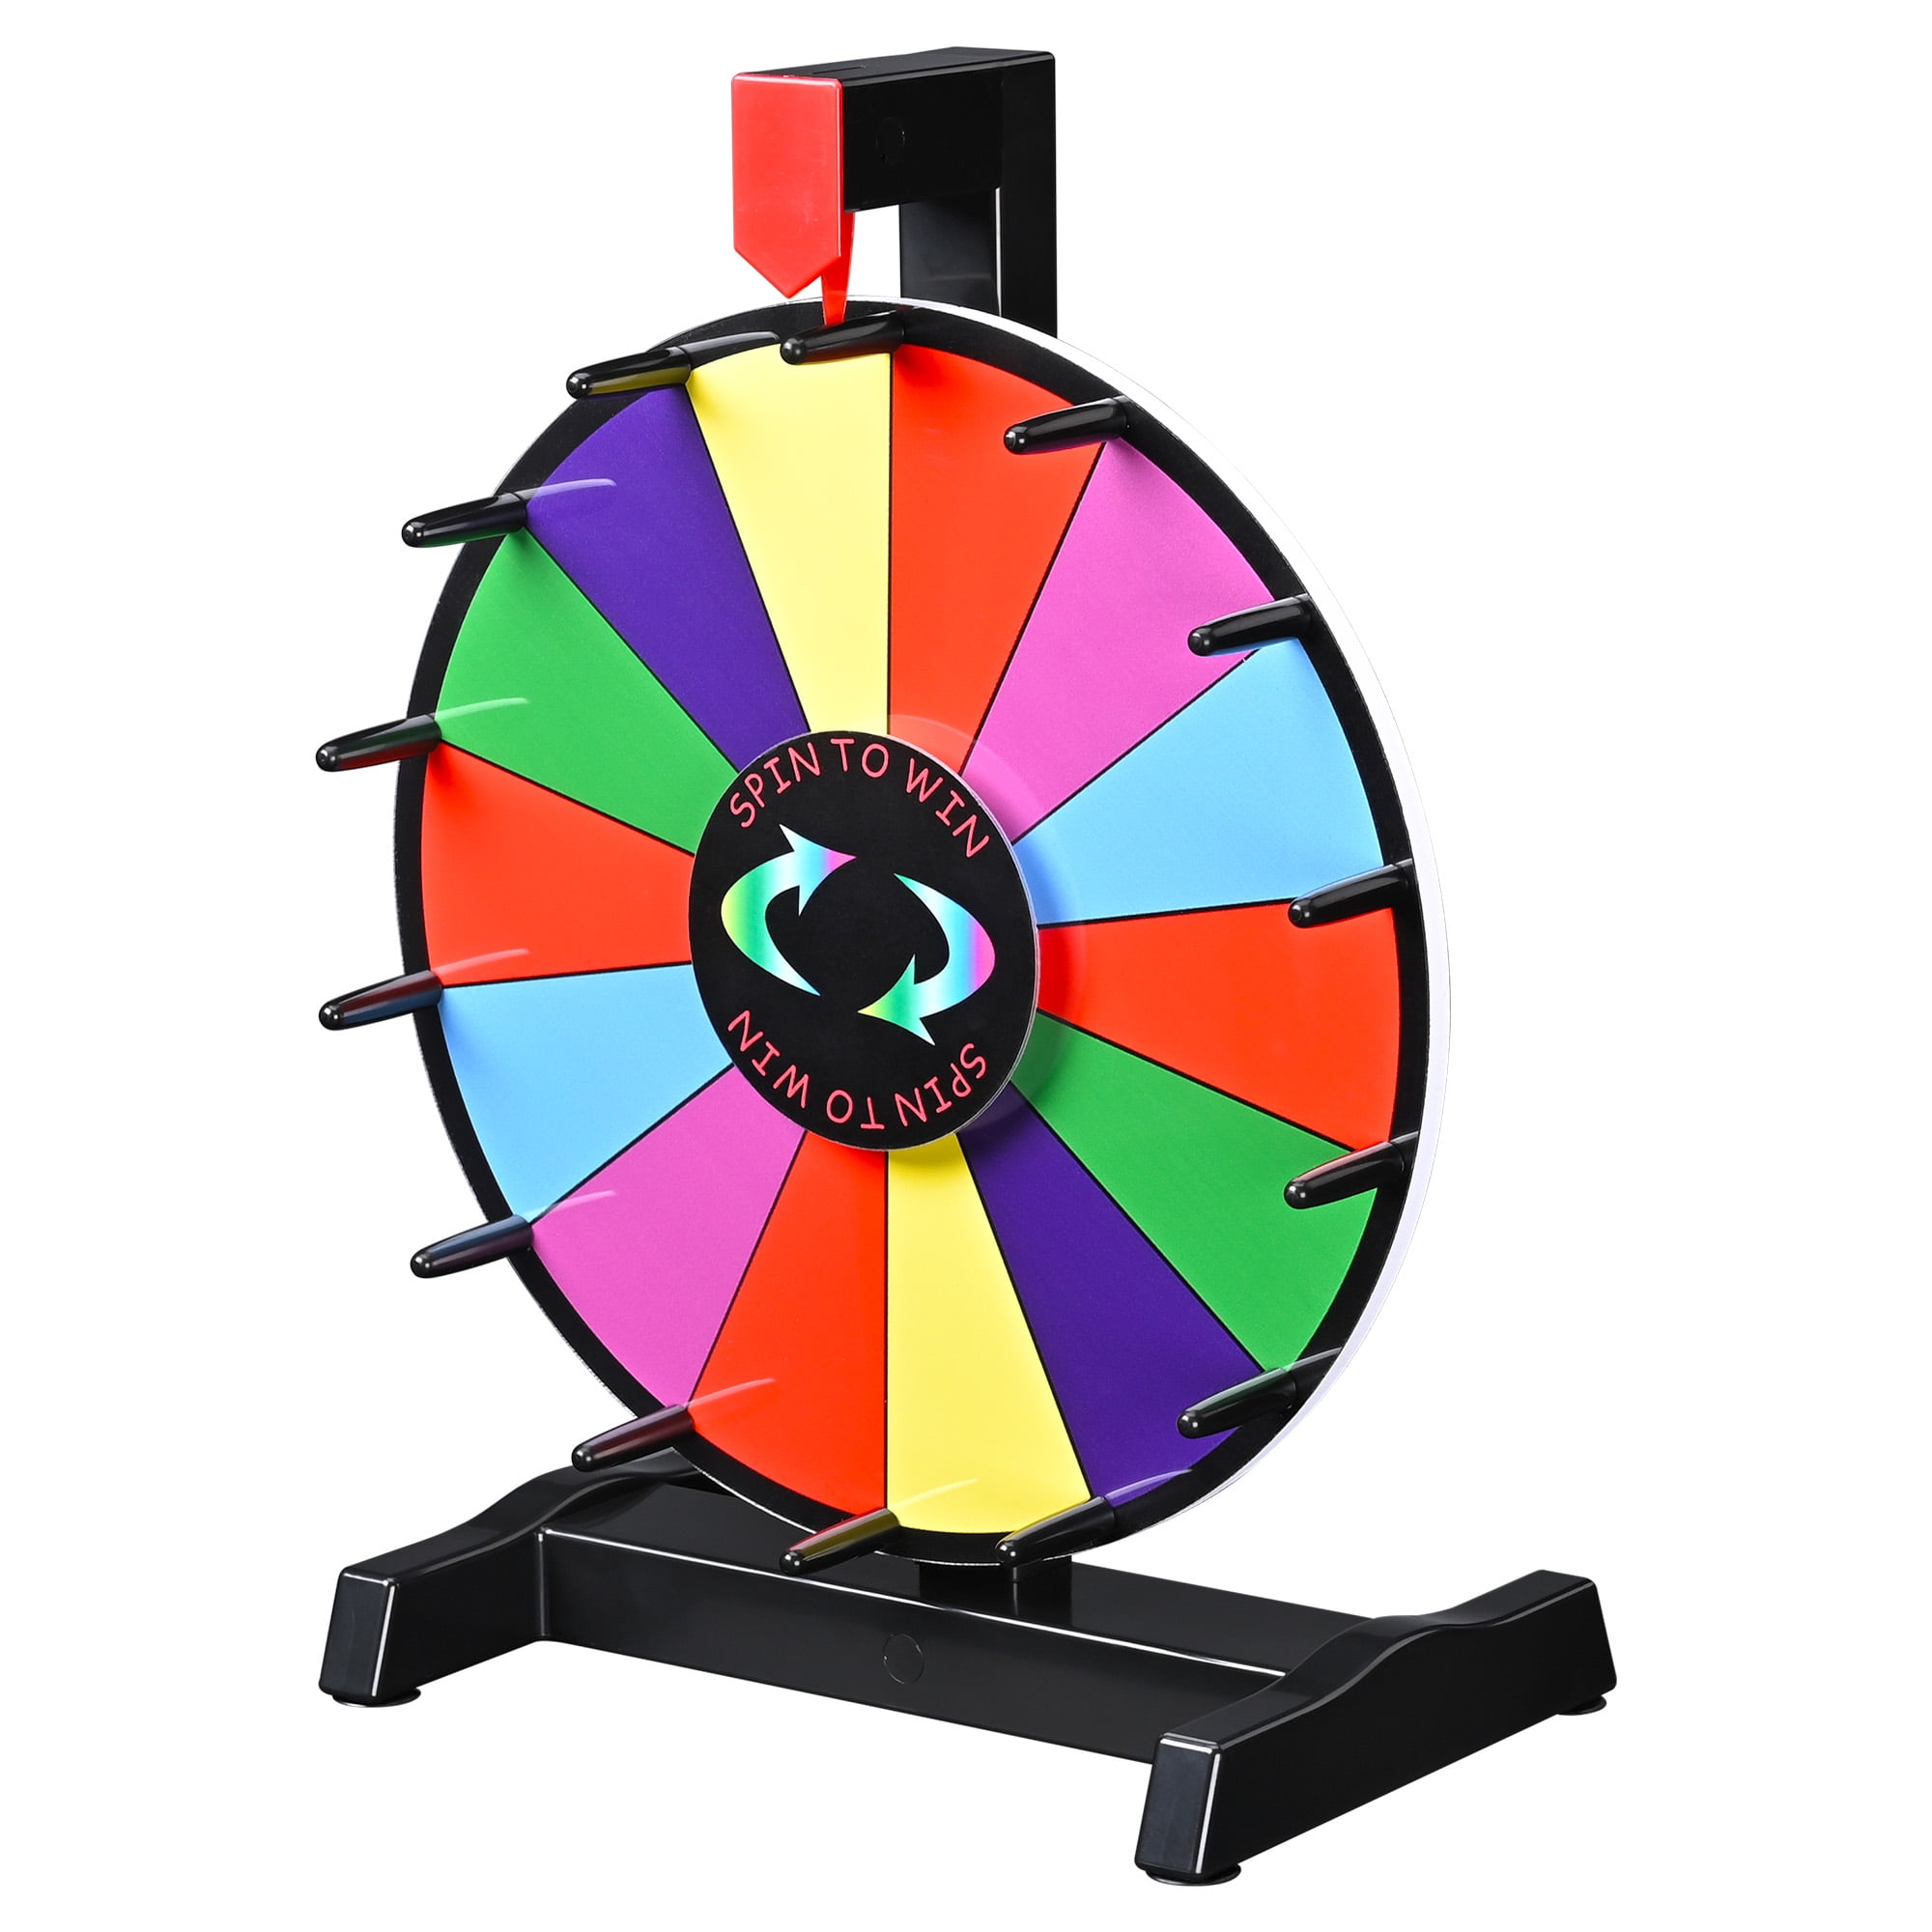 Winspin 18" Tabletop Editable Prize Wheel Fortune 12 Slot Spin Game Tradeshow for sale online 